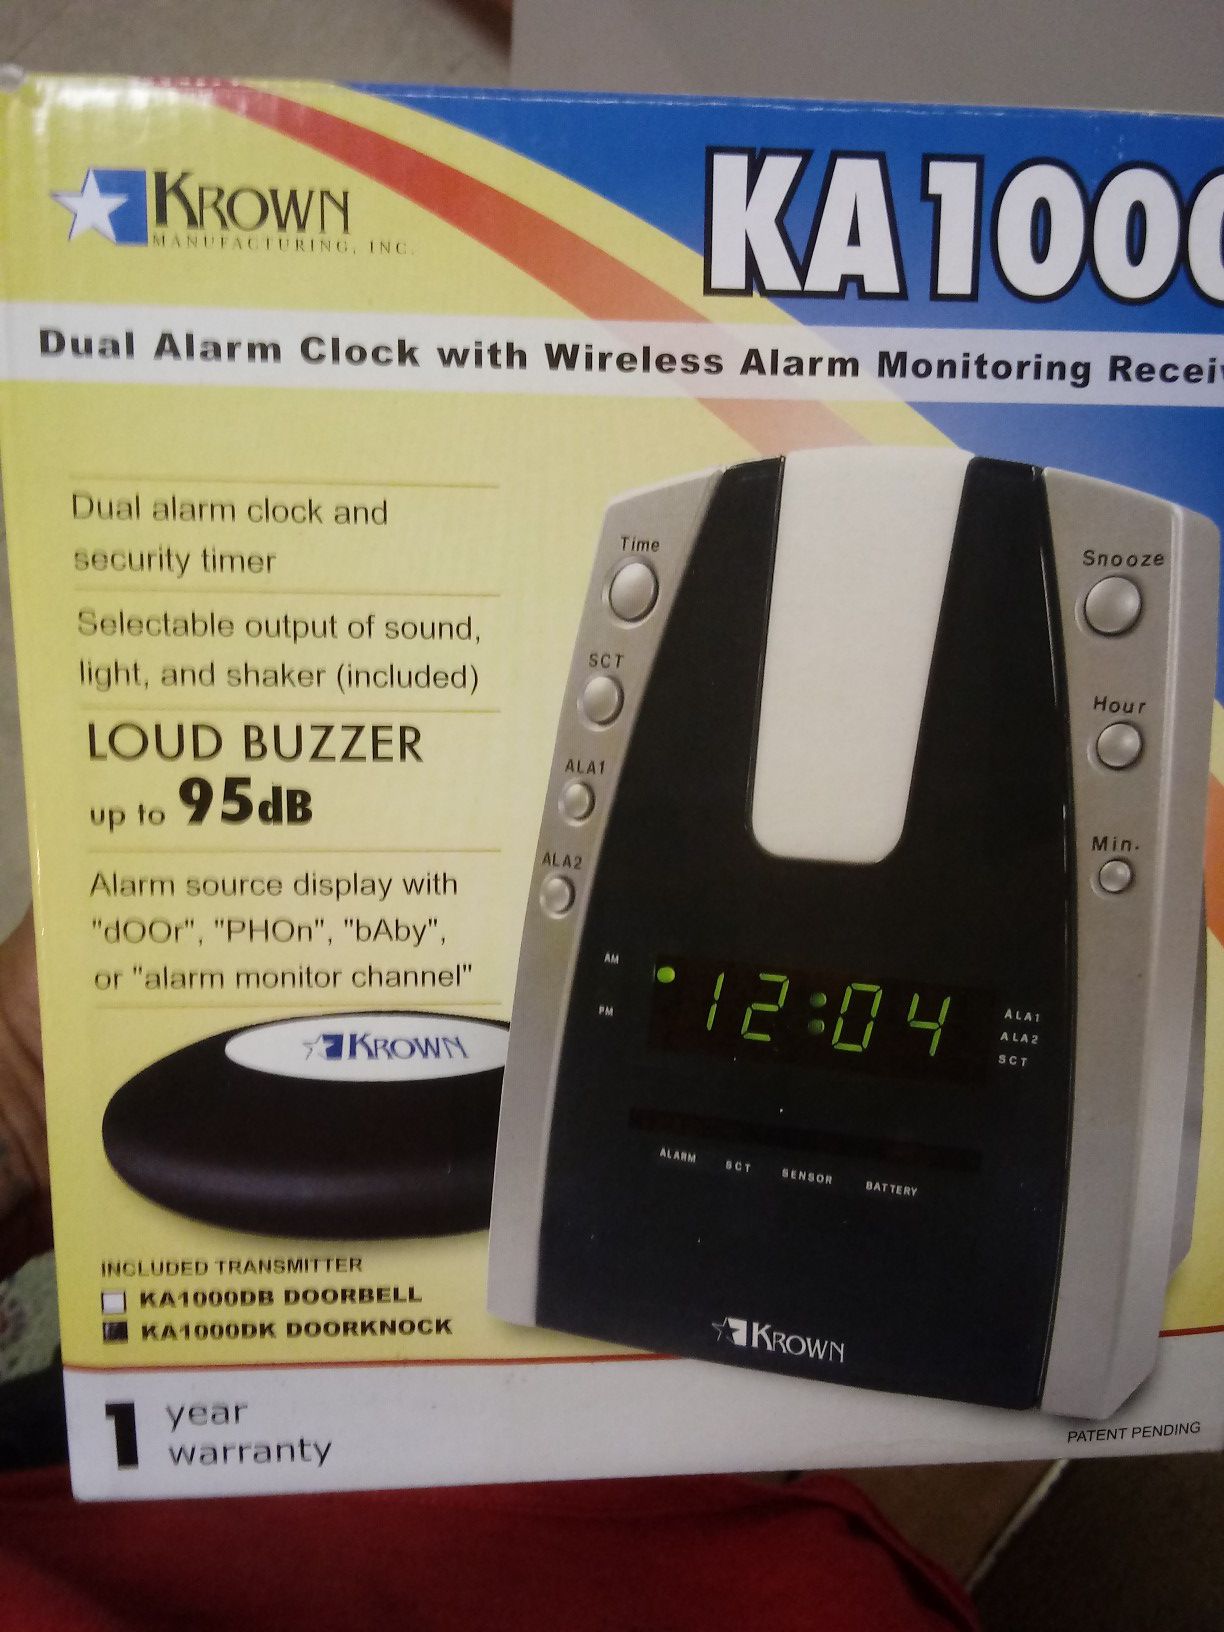 Krown Manufacturing KA1000 Dual Alarm Clock with Wireless Alarm Monitoring Receiver(HEARING IMPAIRED)